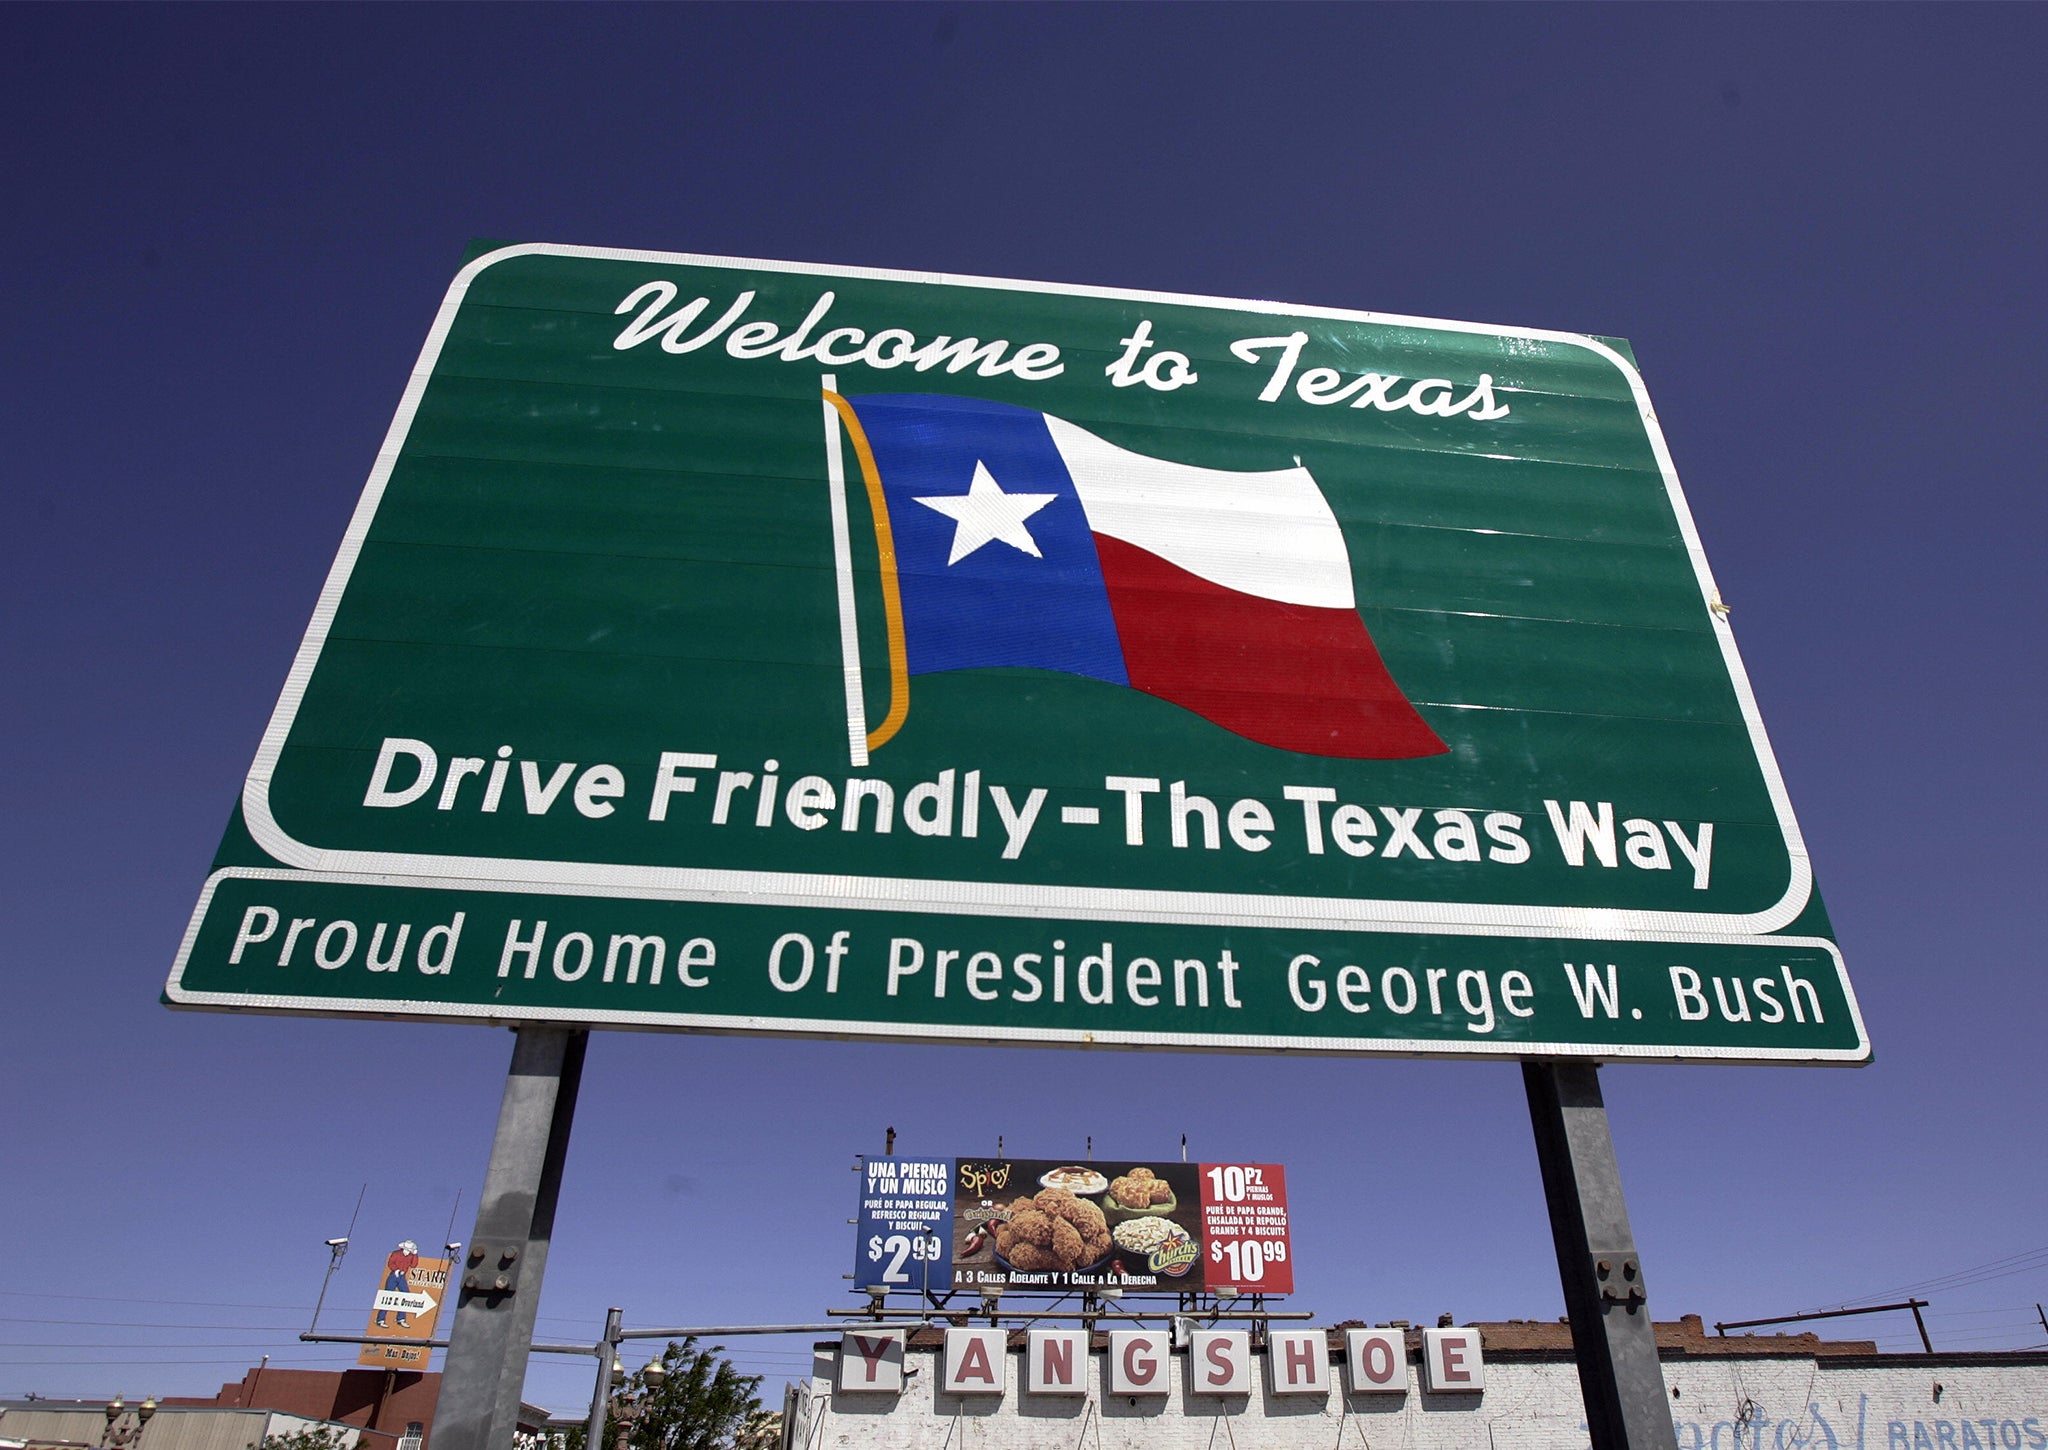 A sign welcomes visitors and residents to El Paso, Texas